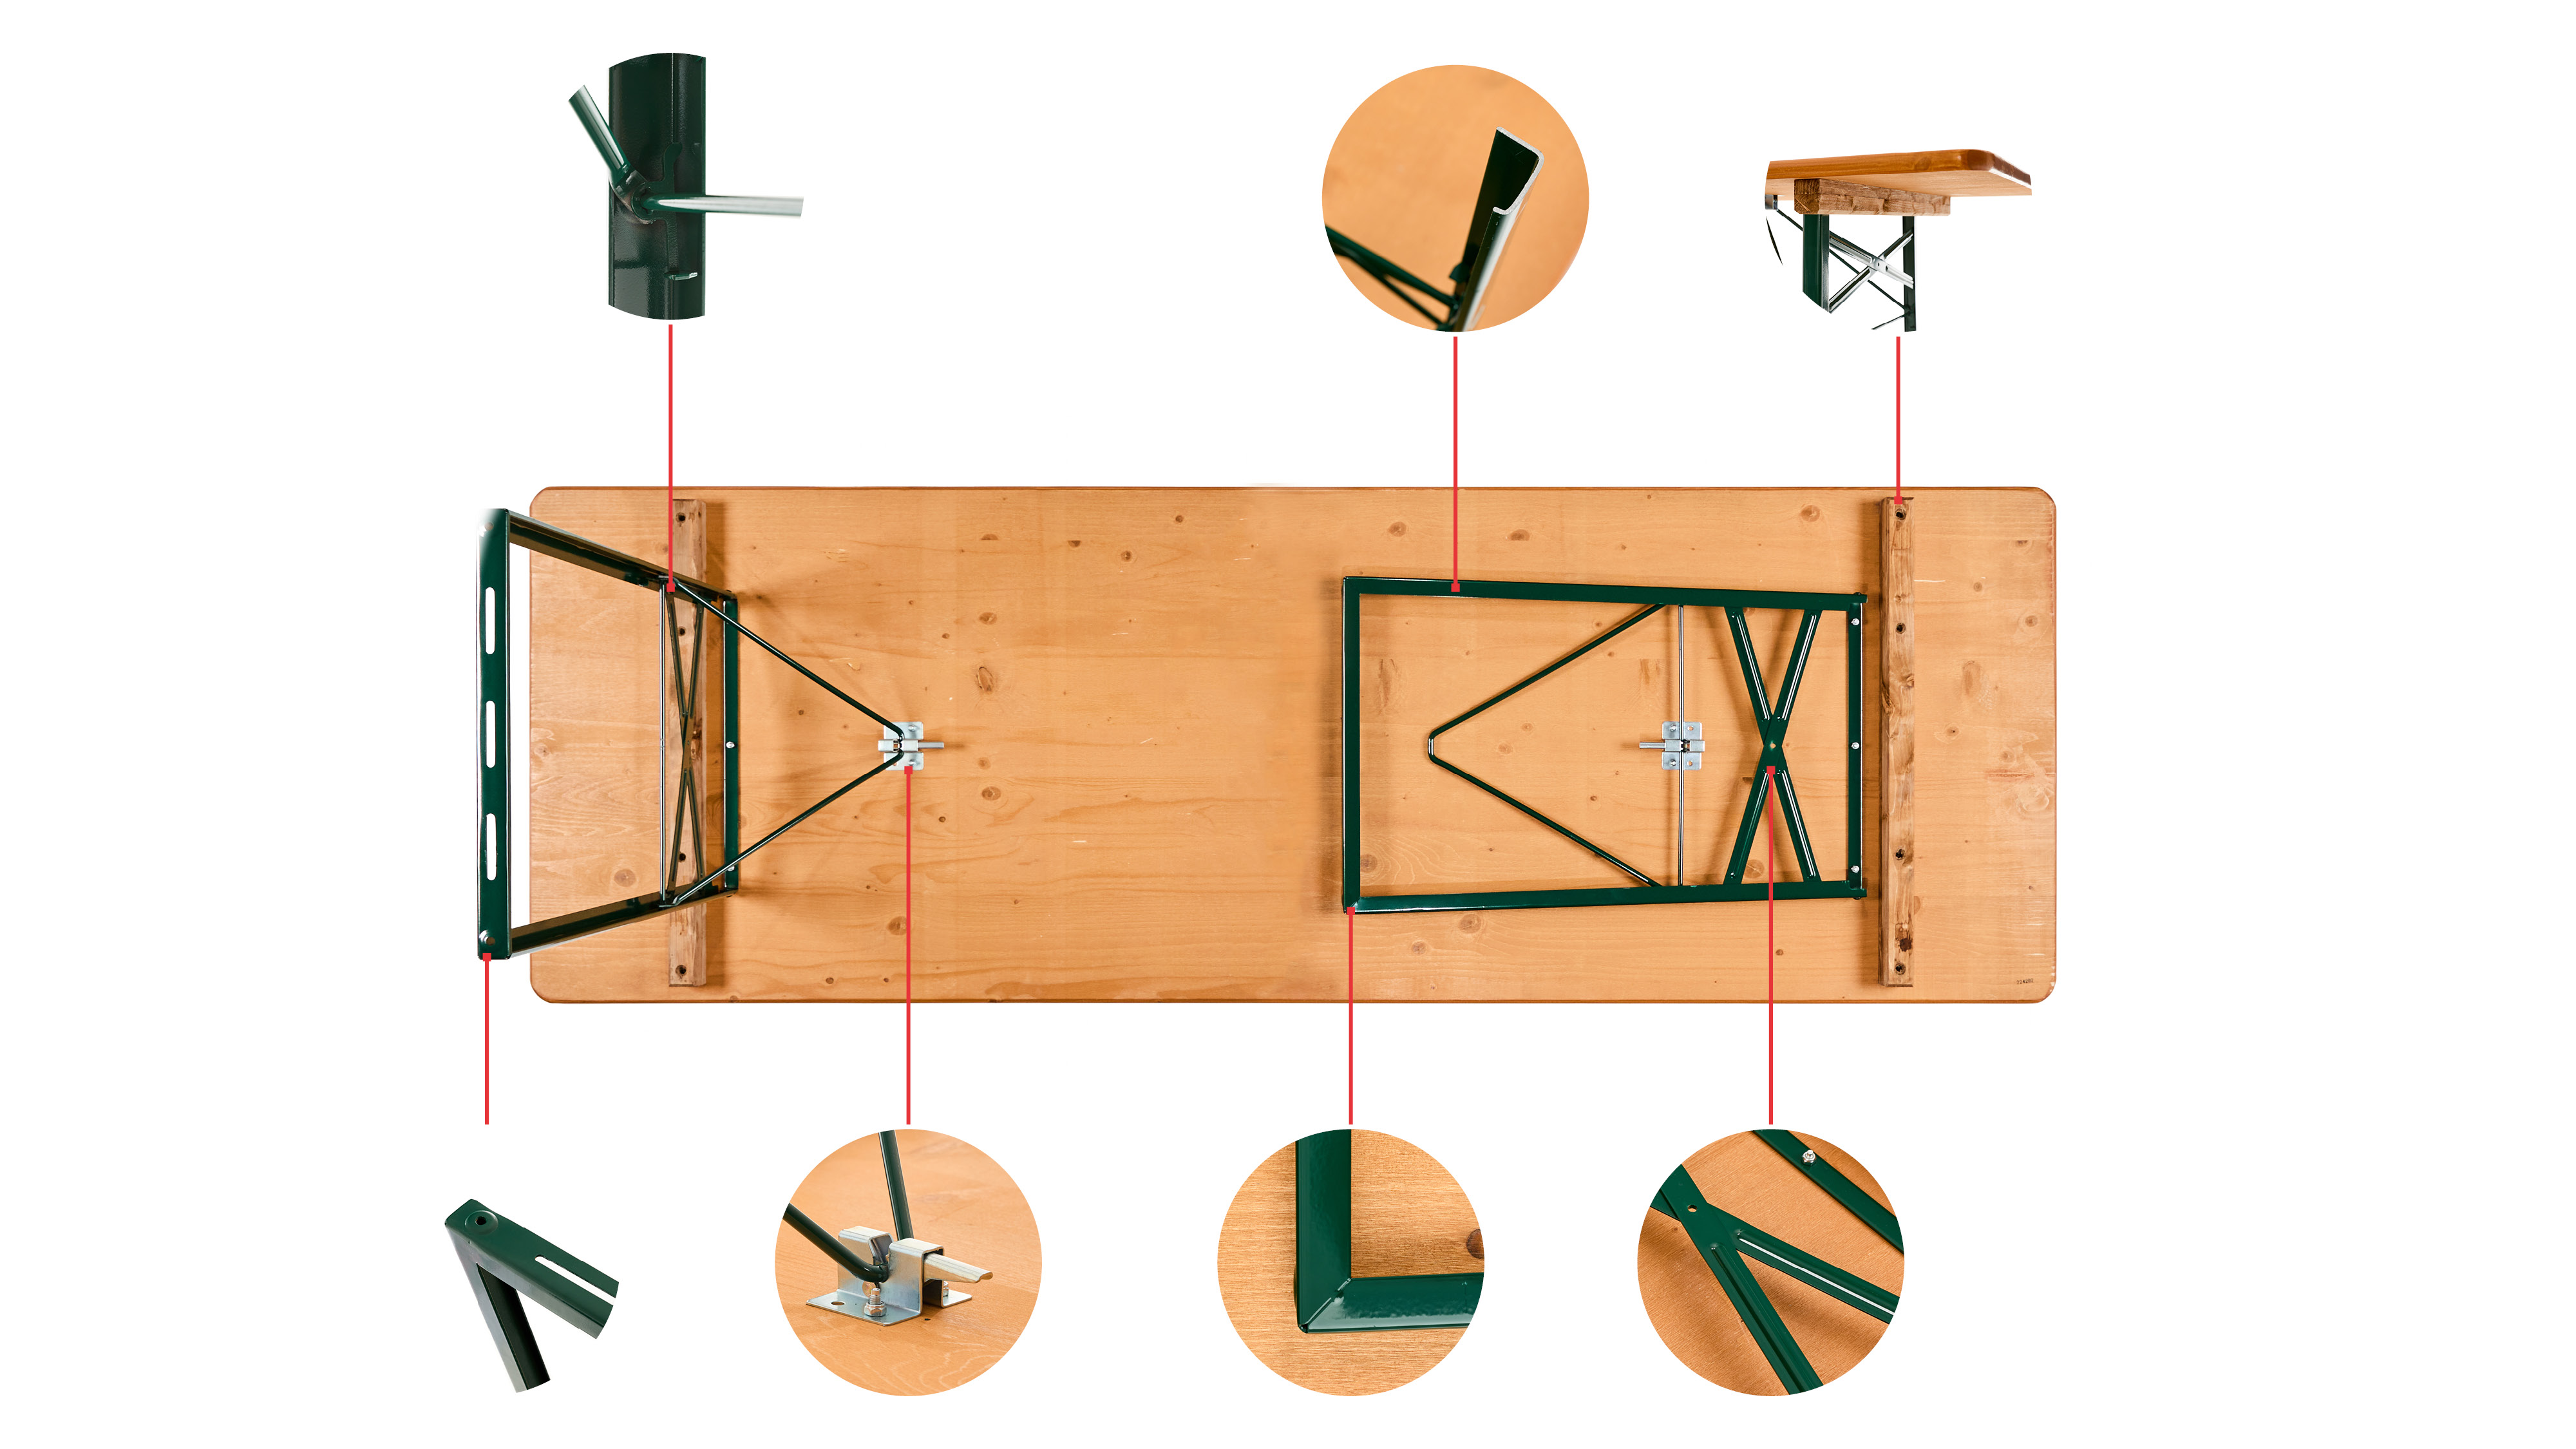 The bottom of the classic beer garden table set including small circles with detail photos of the construction are shown in this graphic.